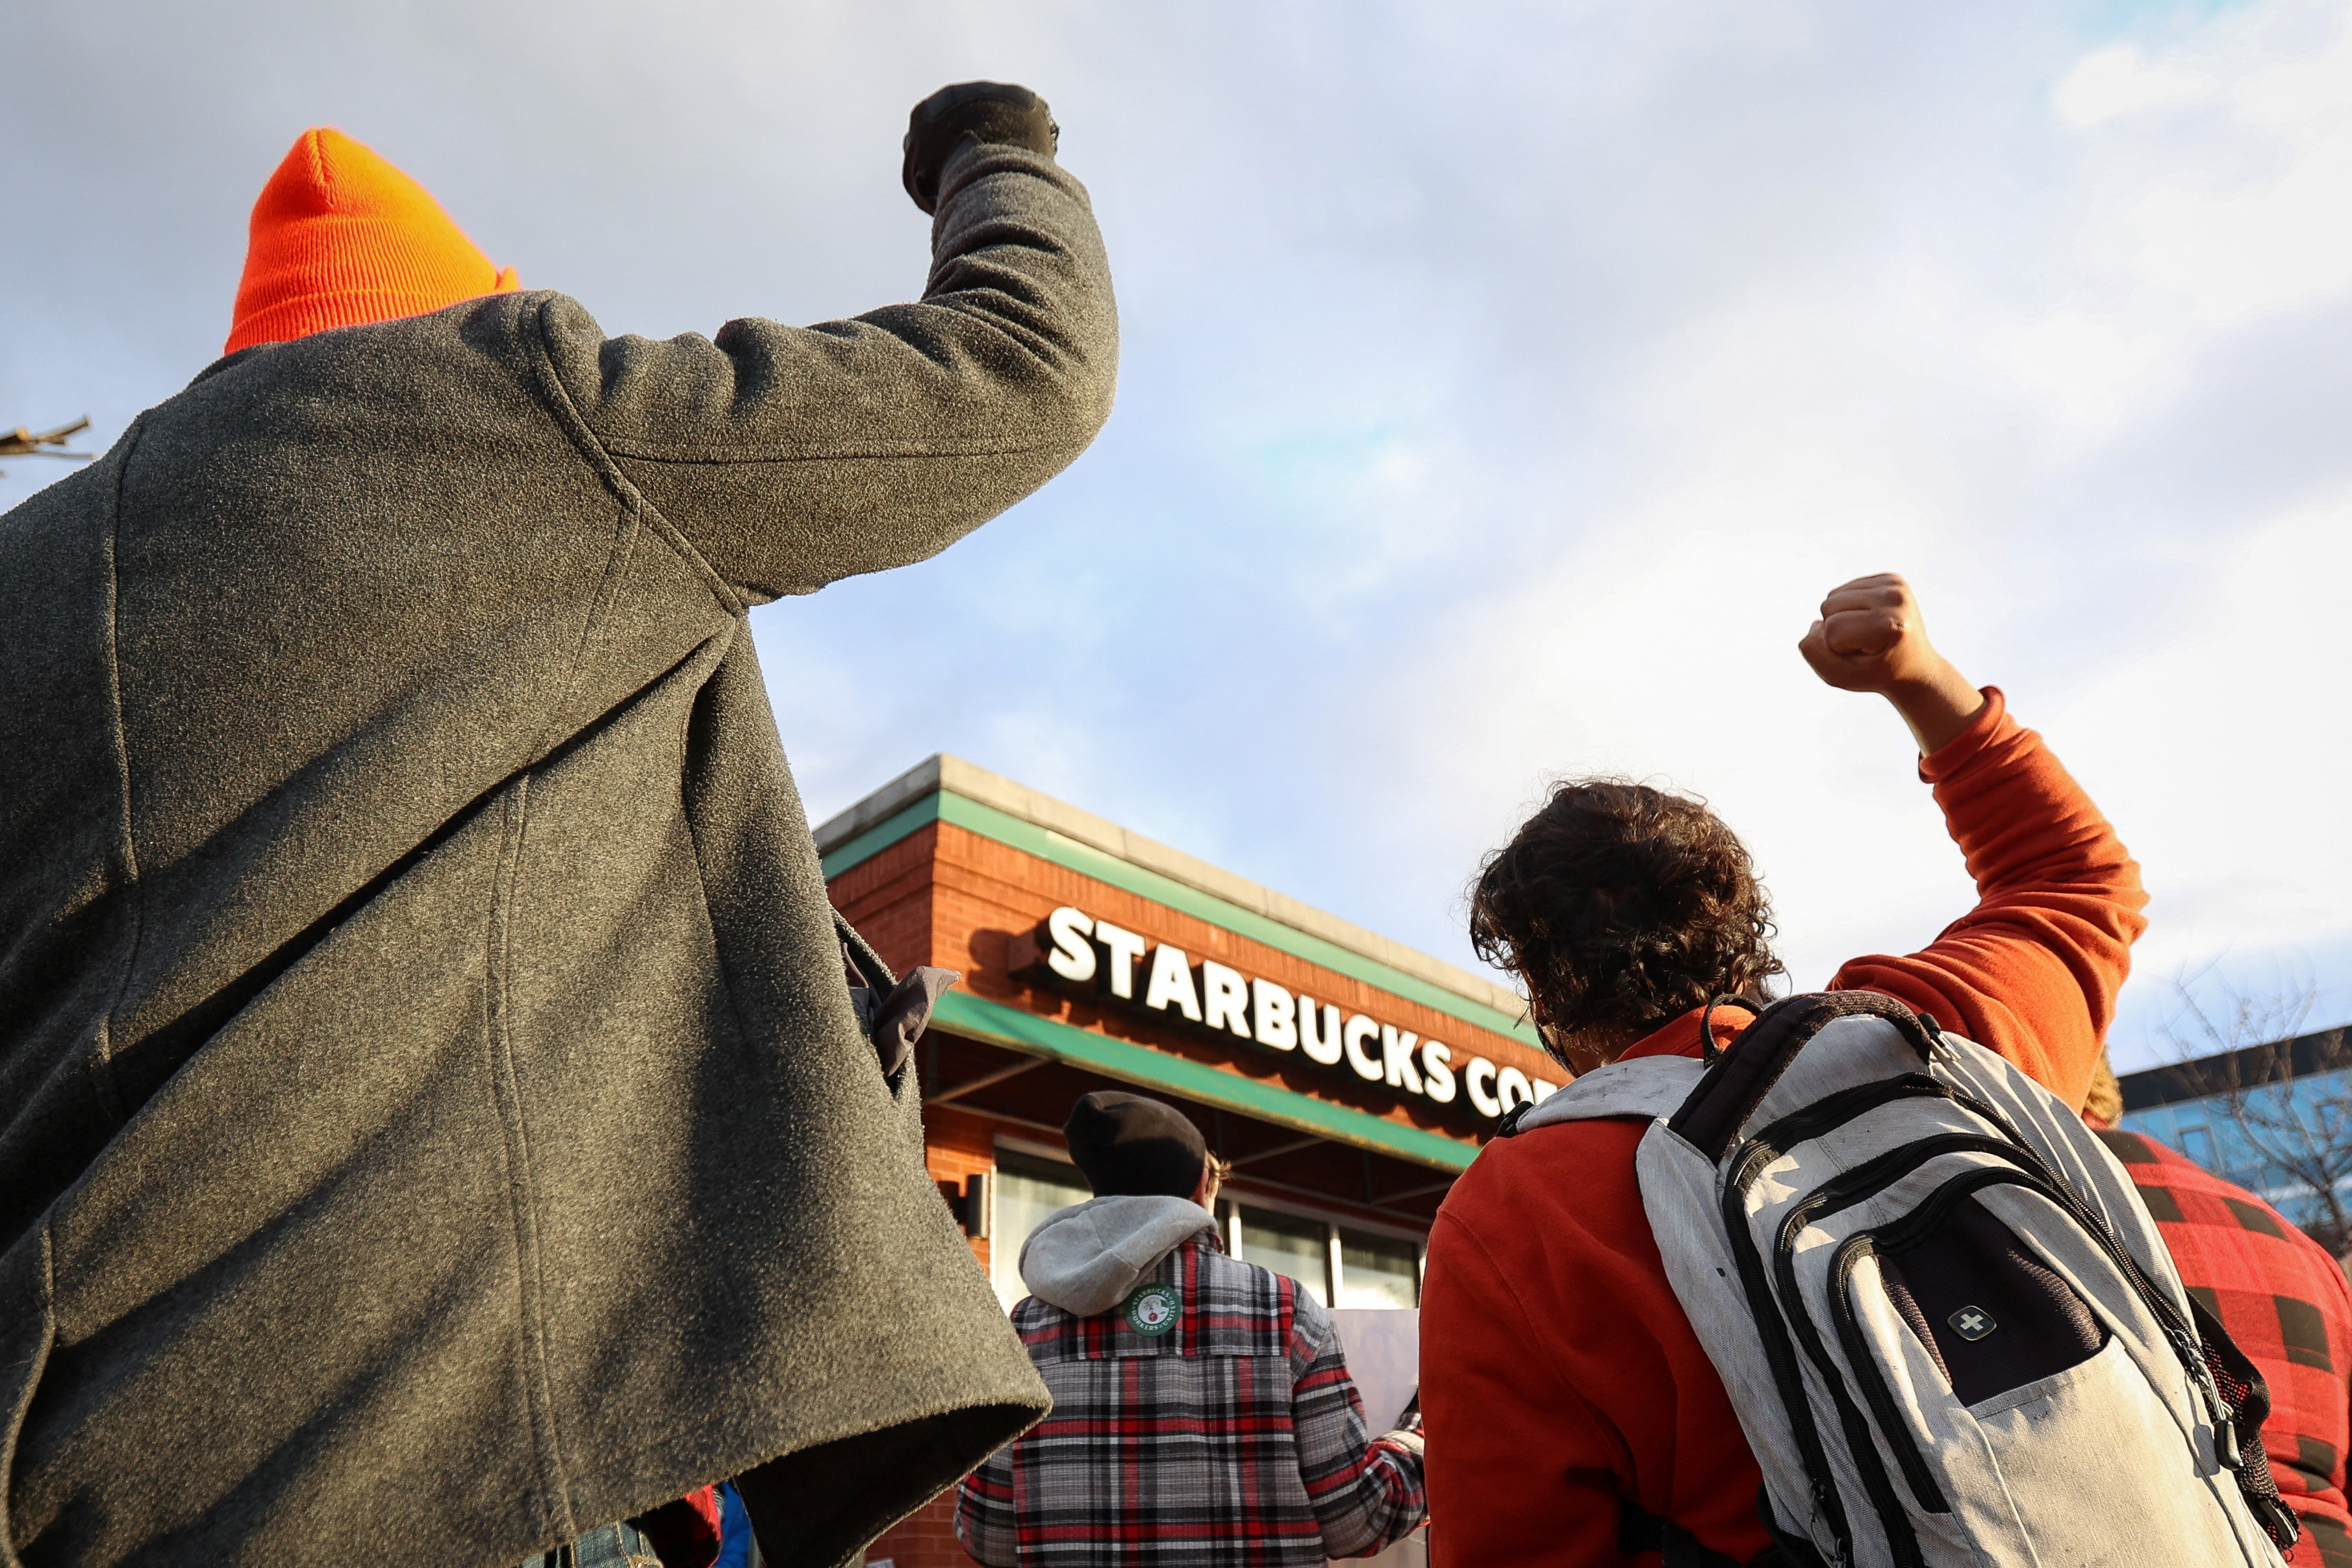 Starbucks U.S. workers at 100 stores hold one-day walkout